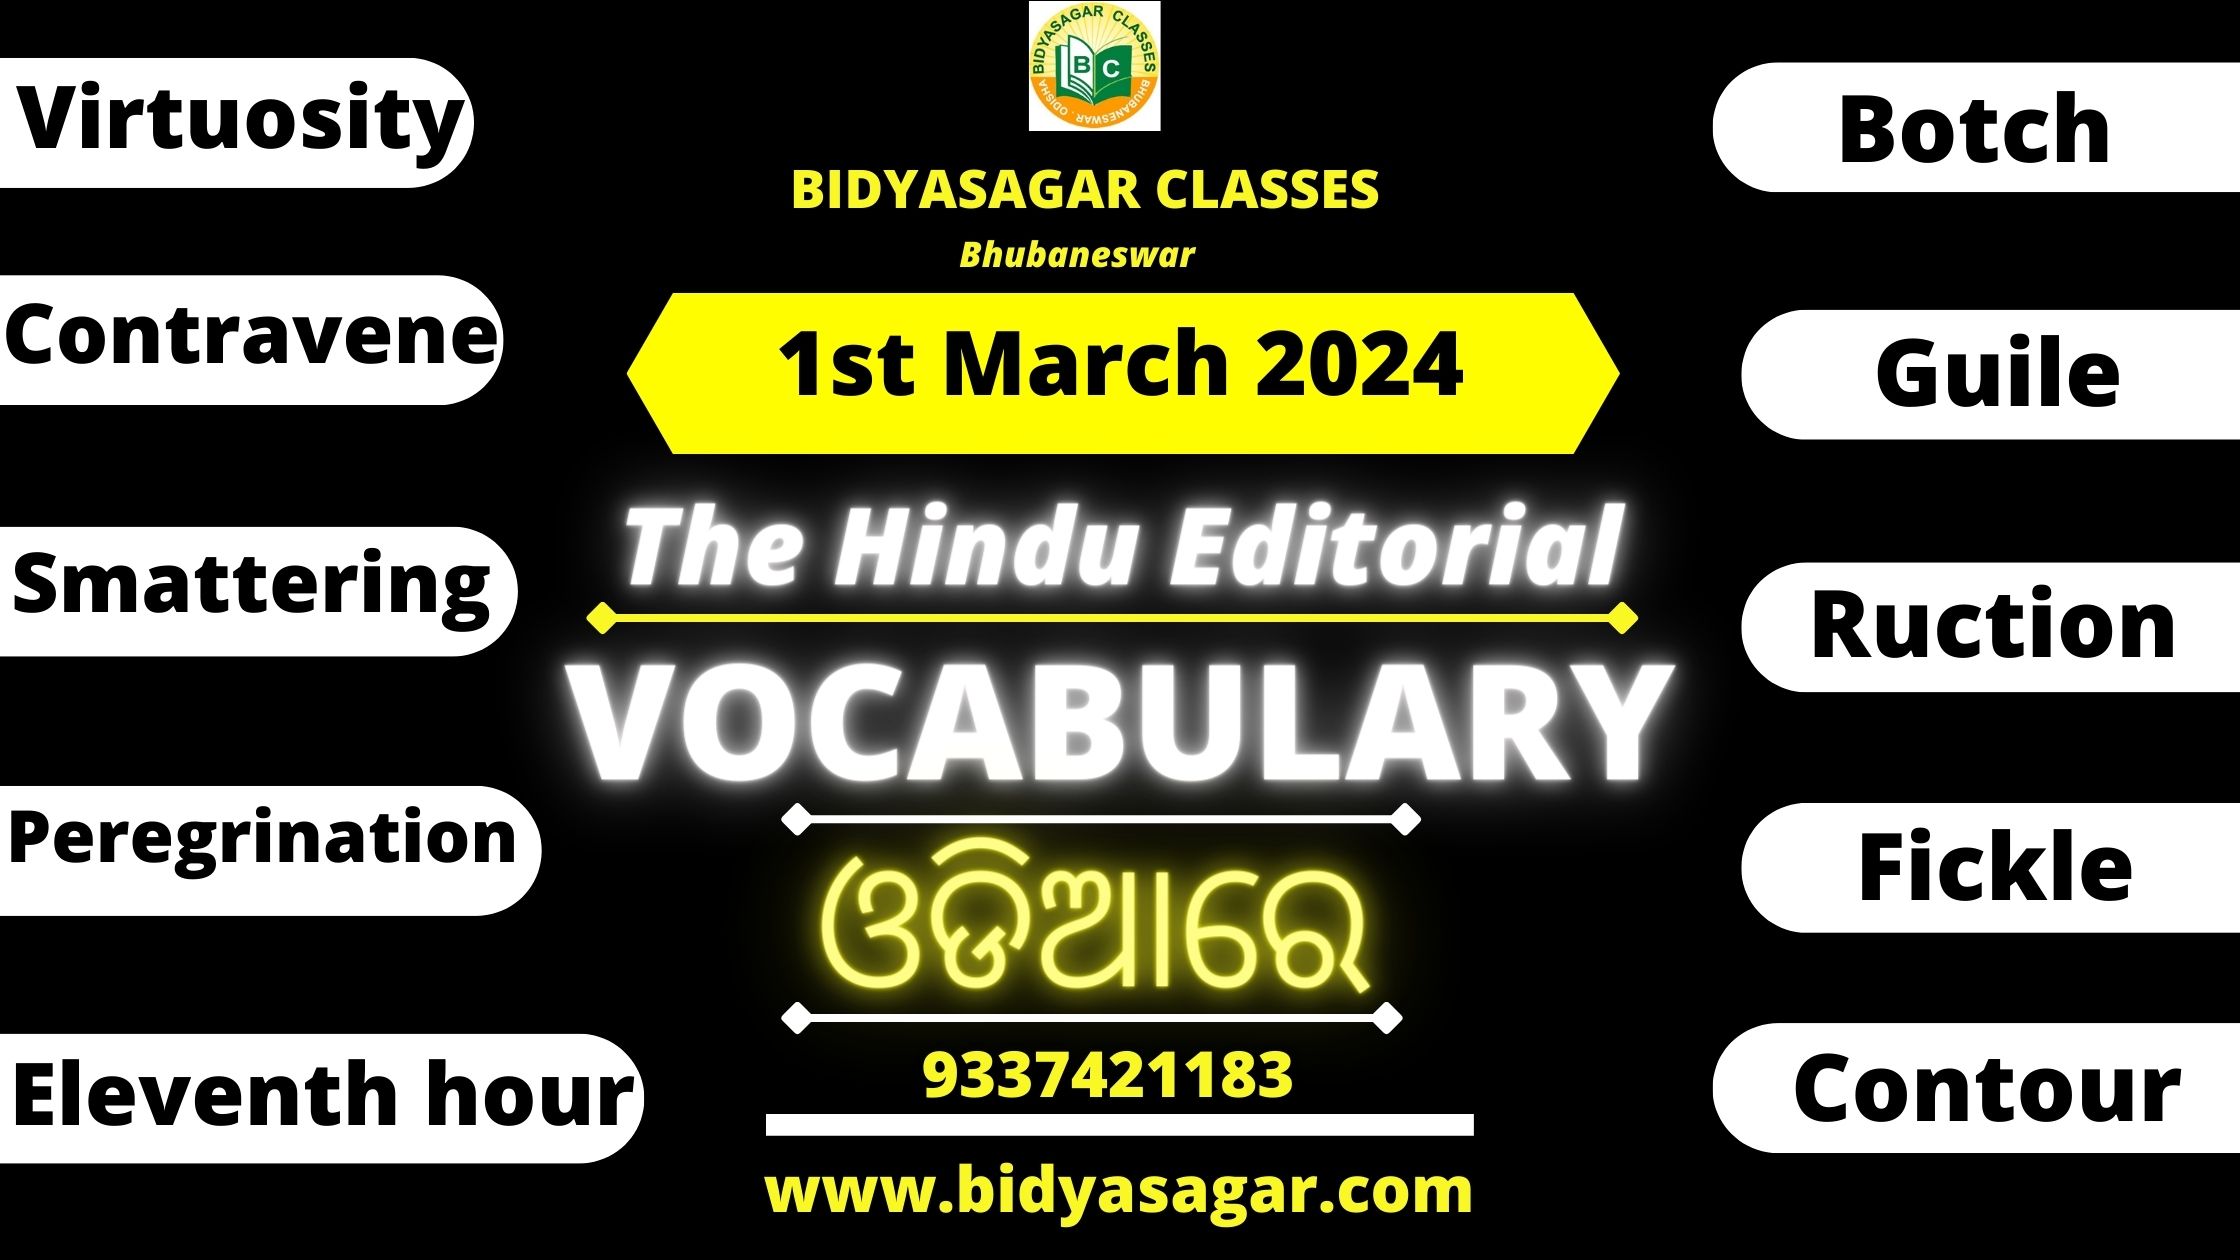 The Hindu Editorial Vocabulary of 1st March 2024